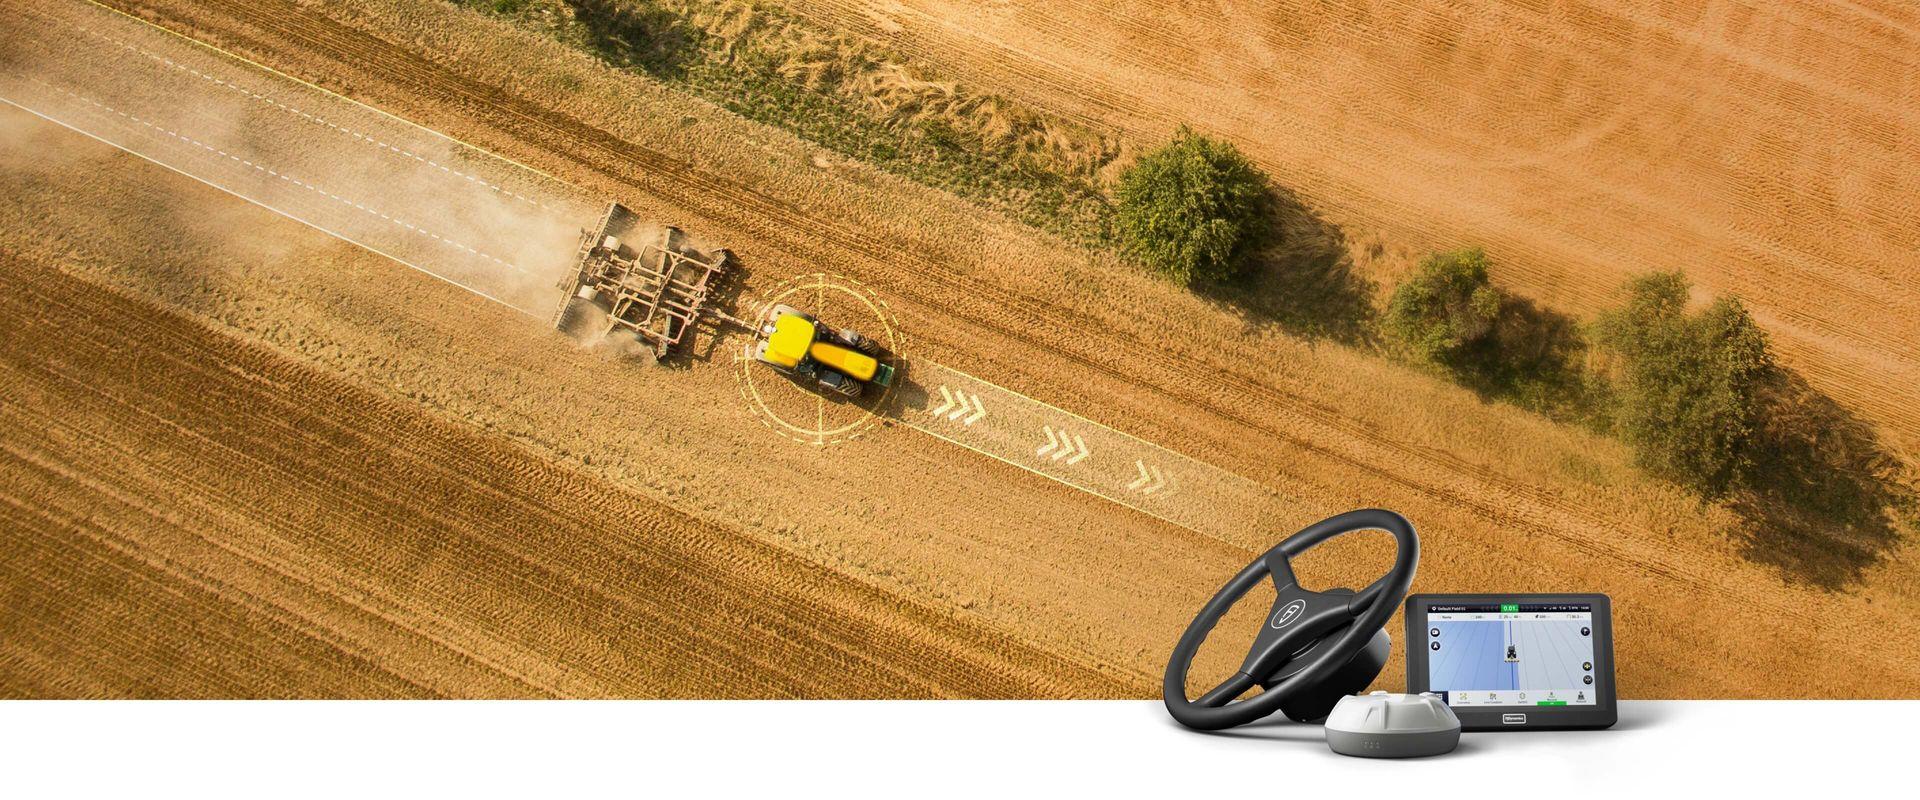 fjd-at2-auto-steer-system